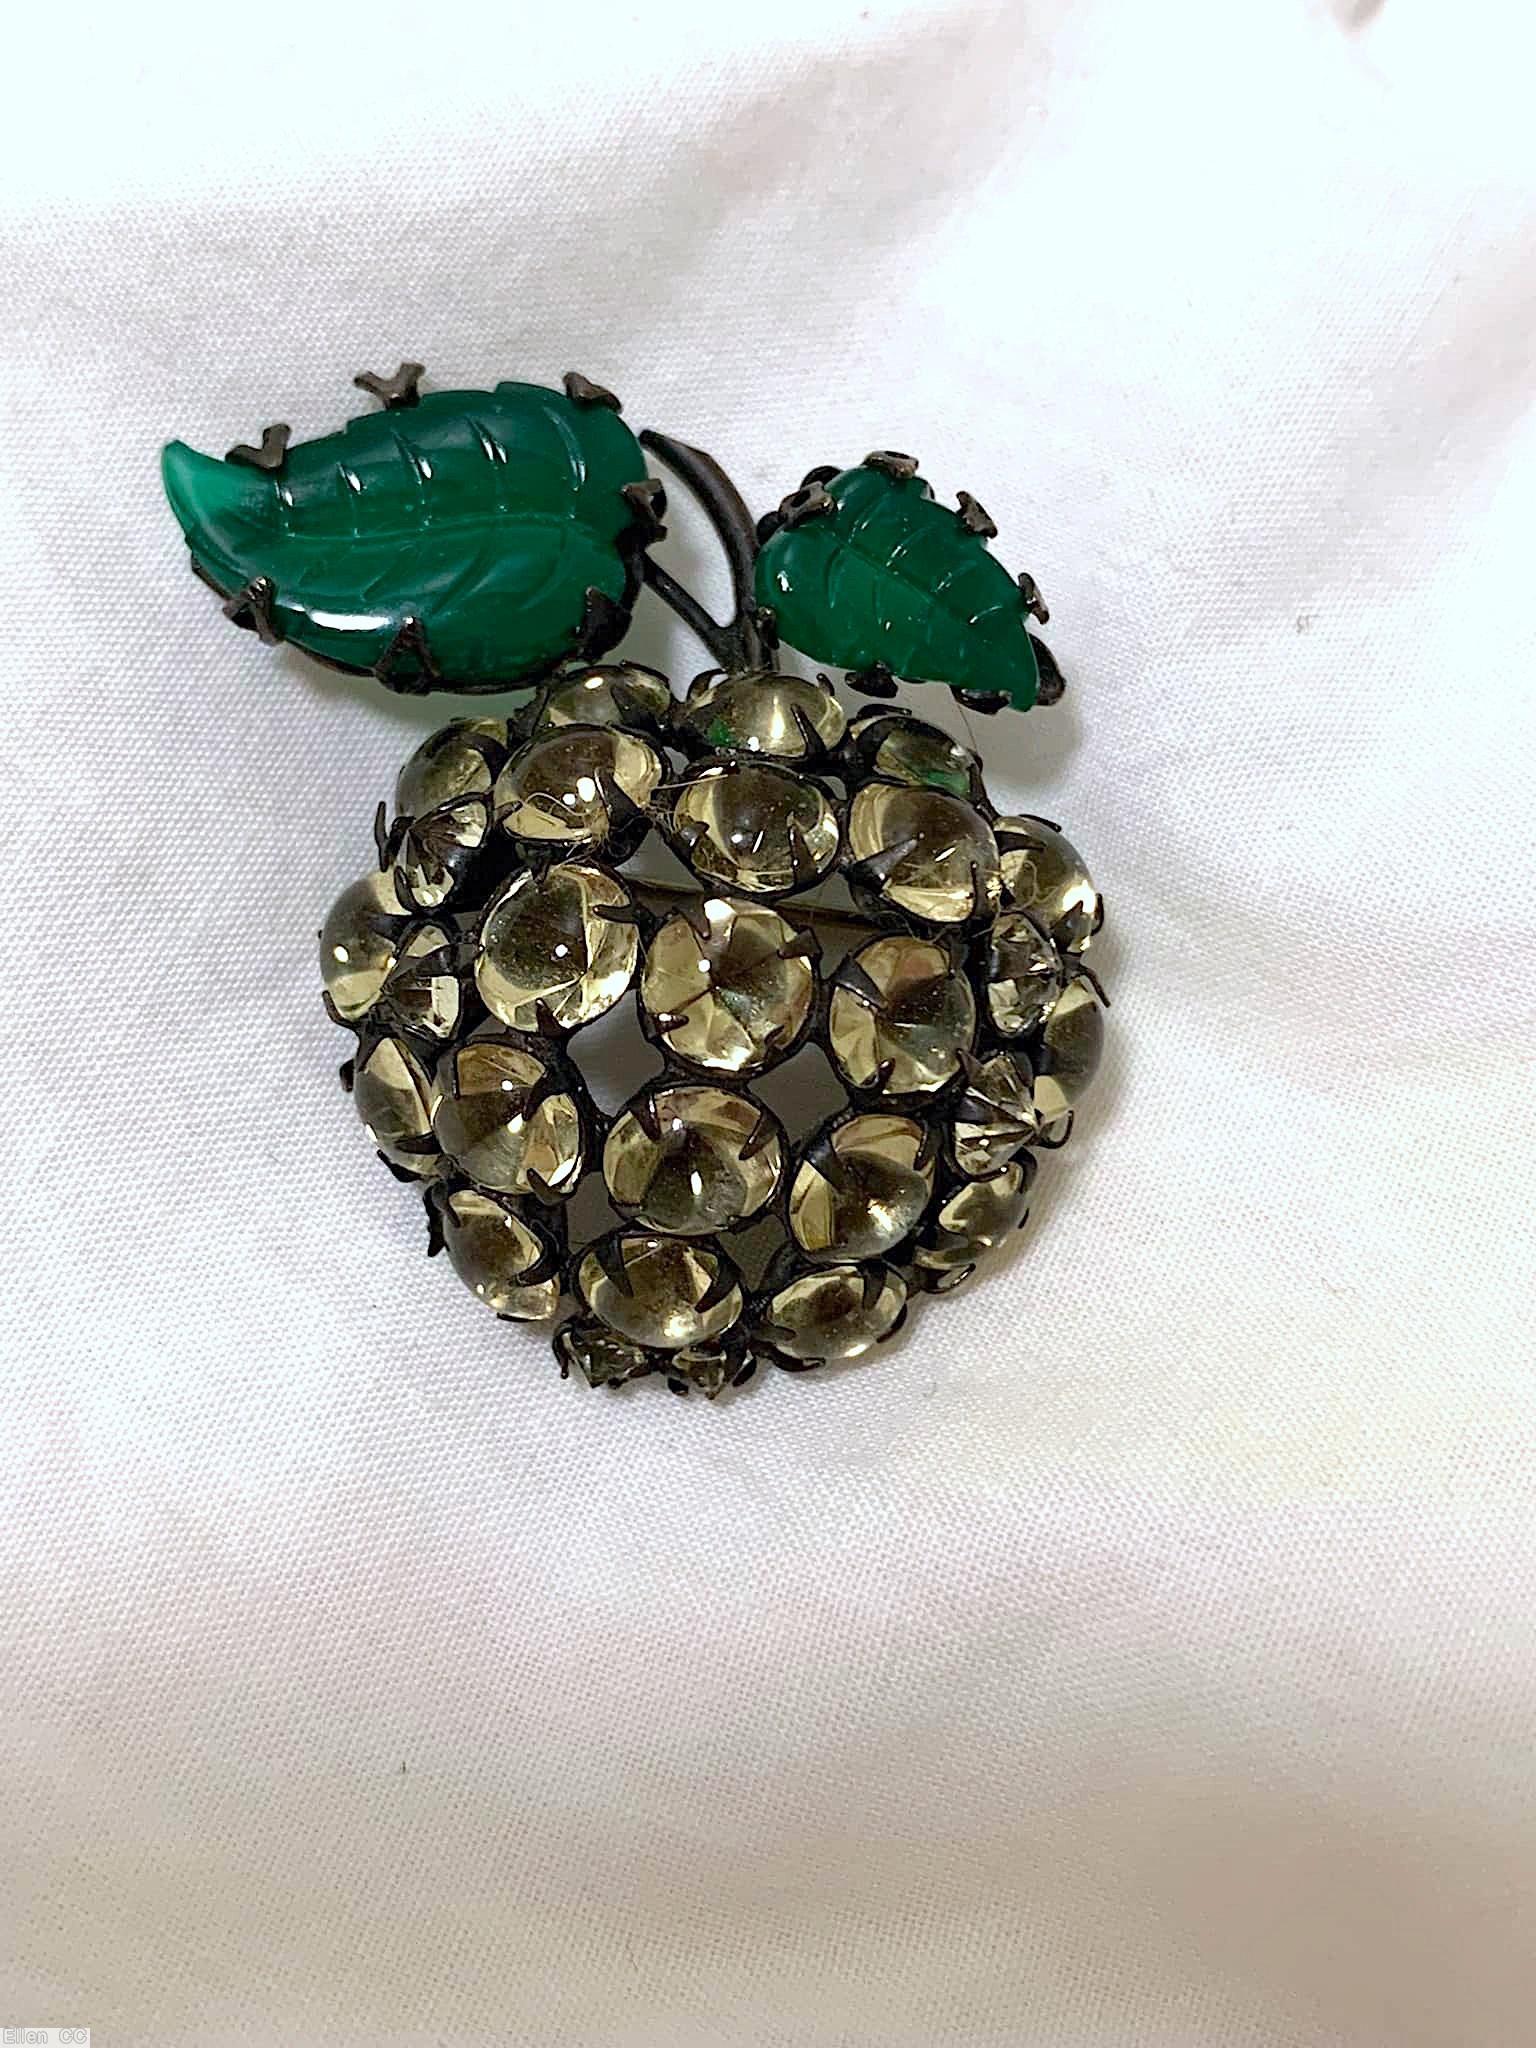 Schreiner 2 carved leaf domed clustered ball berry pin 1 large leaf 1 small leaf short hammered stem clear champagne chaton green carved leaf jewelry